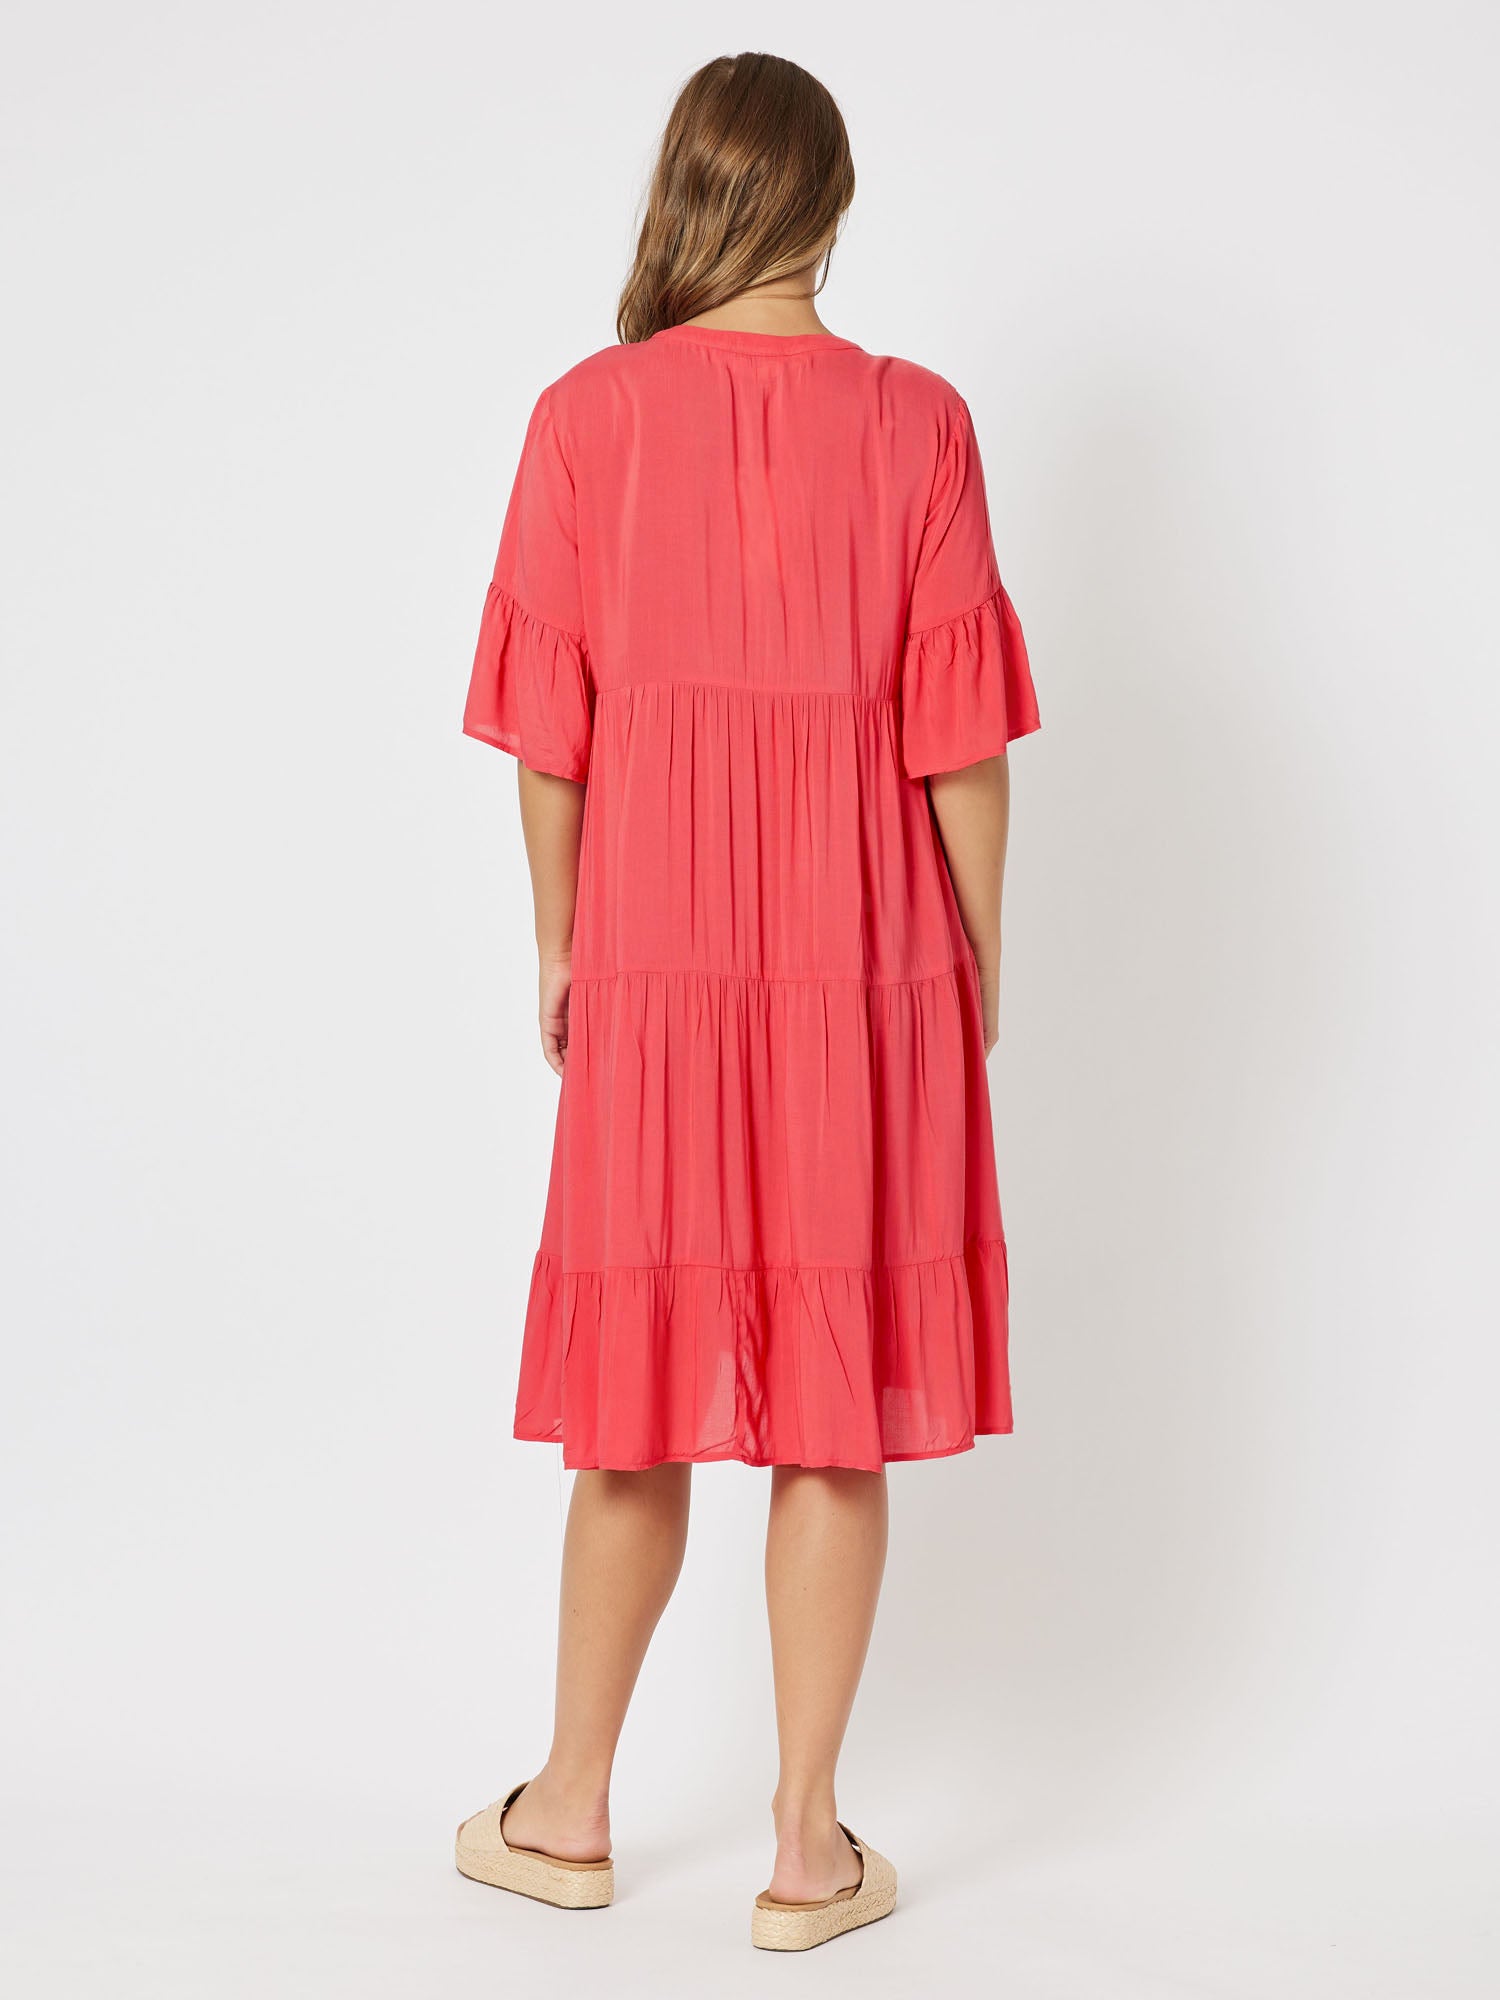 Tiered Swing Dress - Coral